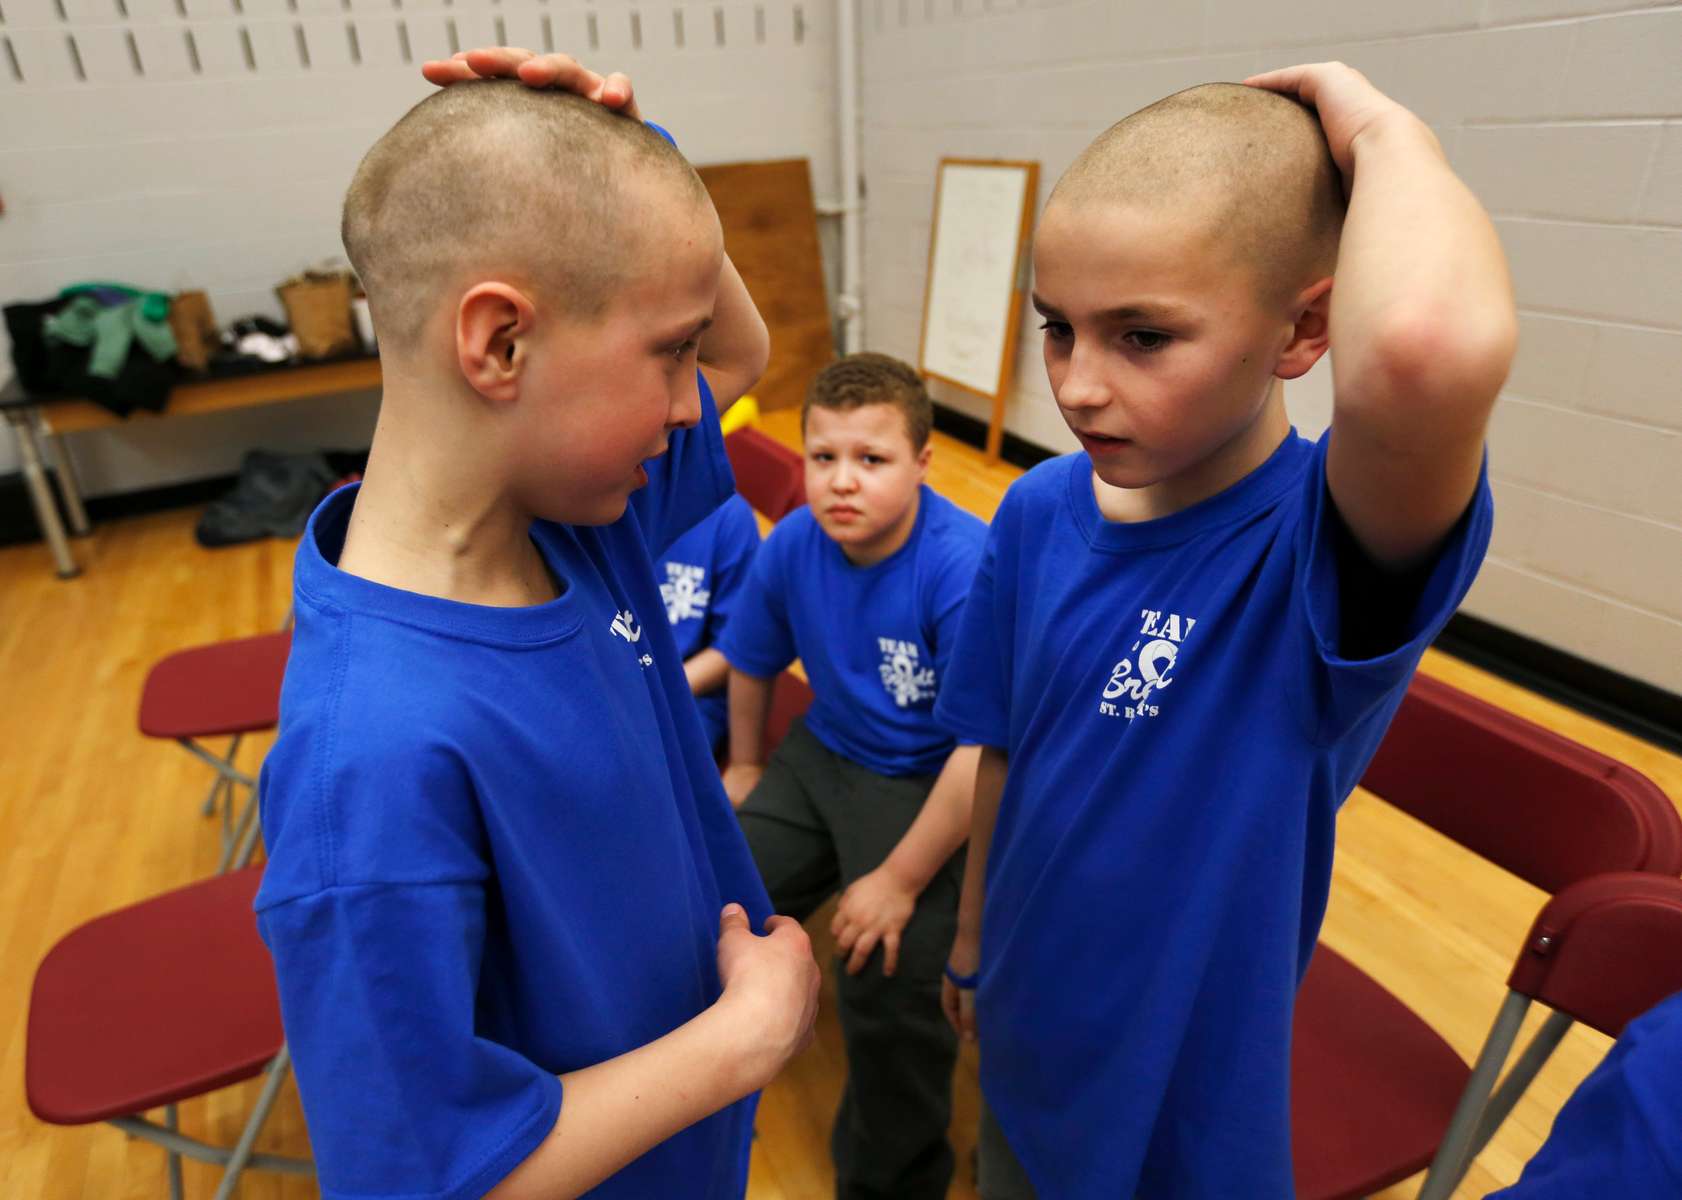 Corbin Migliaccio and Nate Porhacs check out their haircuts as students and faculty from Kennedy Elementary school shaved their head to raise money for St. Baldrick’s Foundation to help pediatric cancer research, at the school in Roxbury.